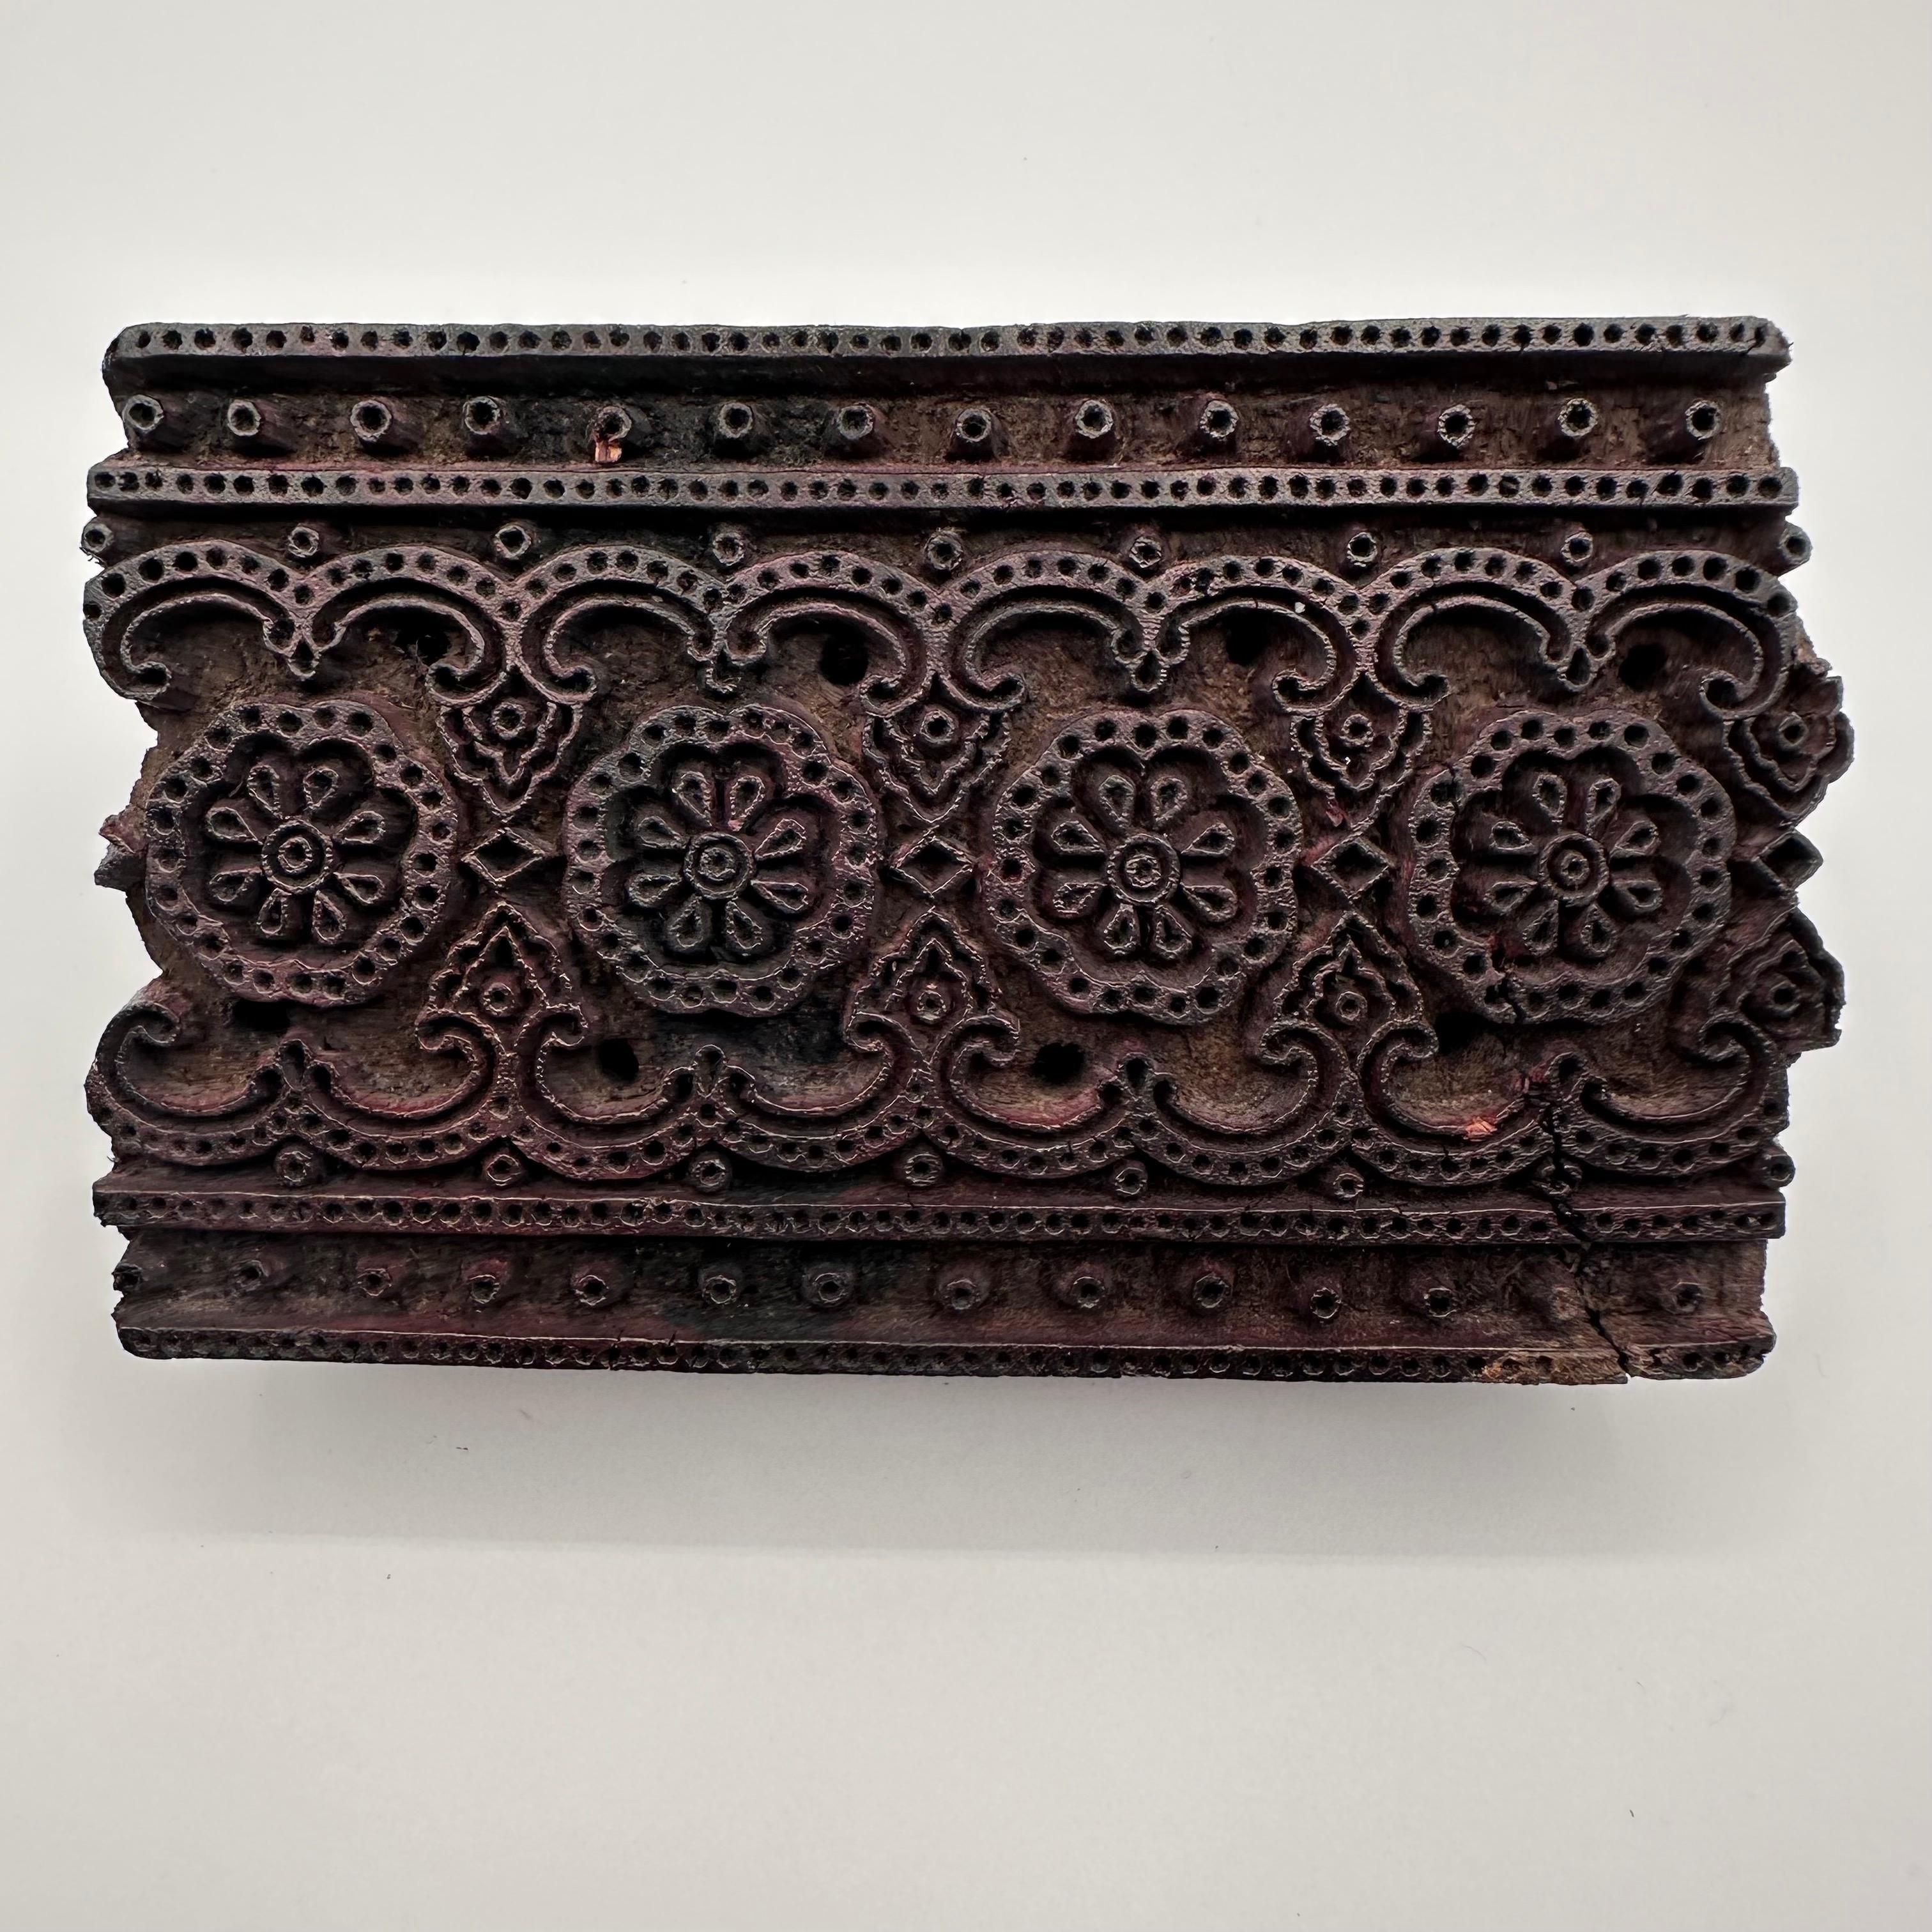 Antique Hand Carved Wood Printing Block in Dark Rosette Pattern For Sale 9